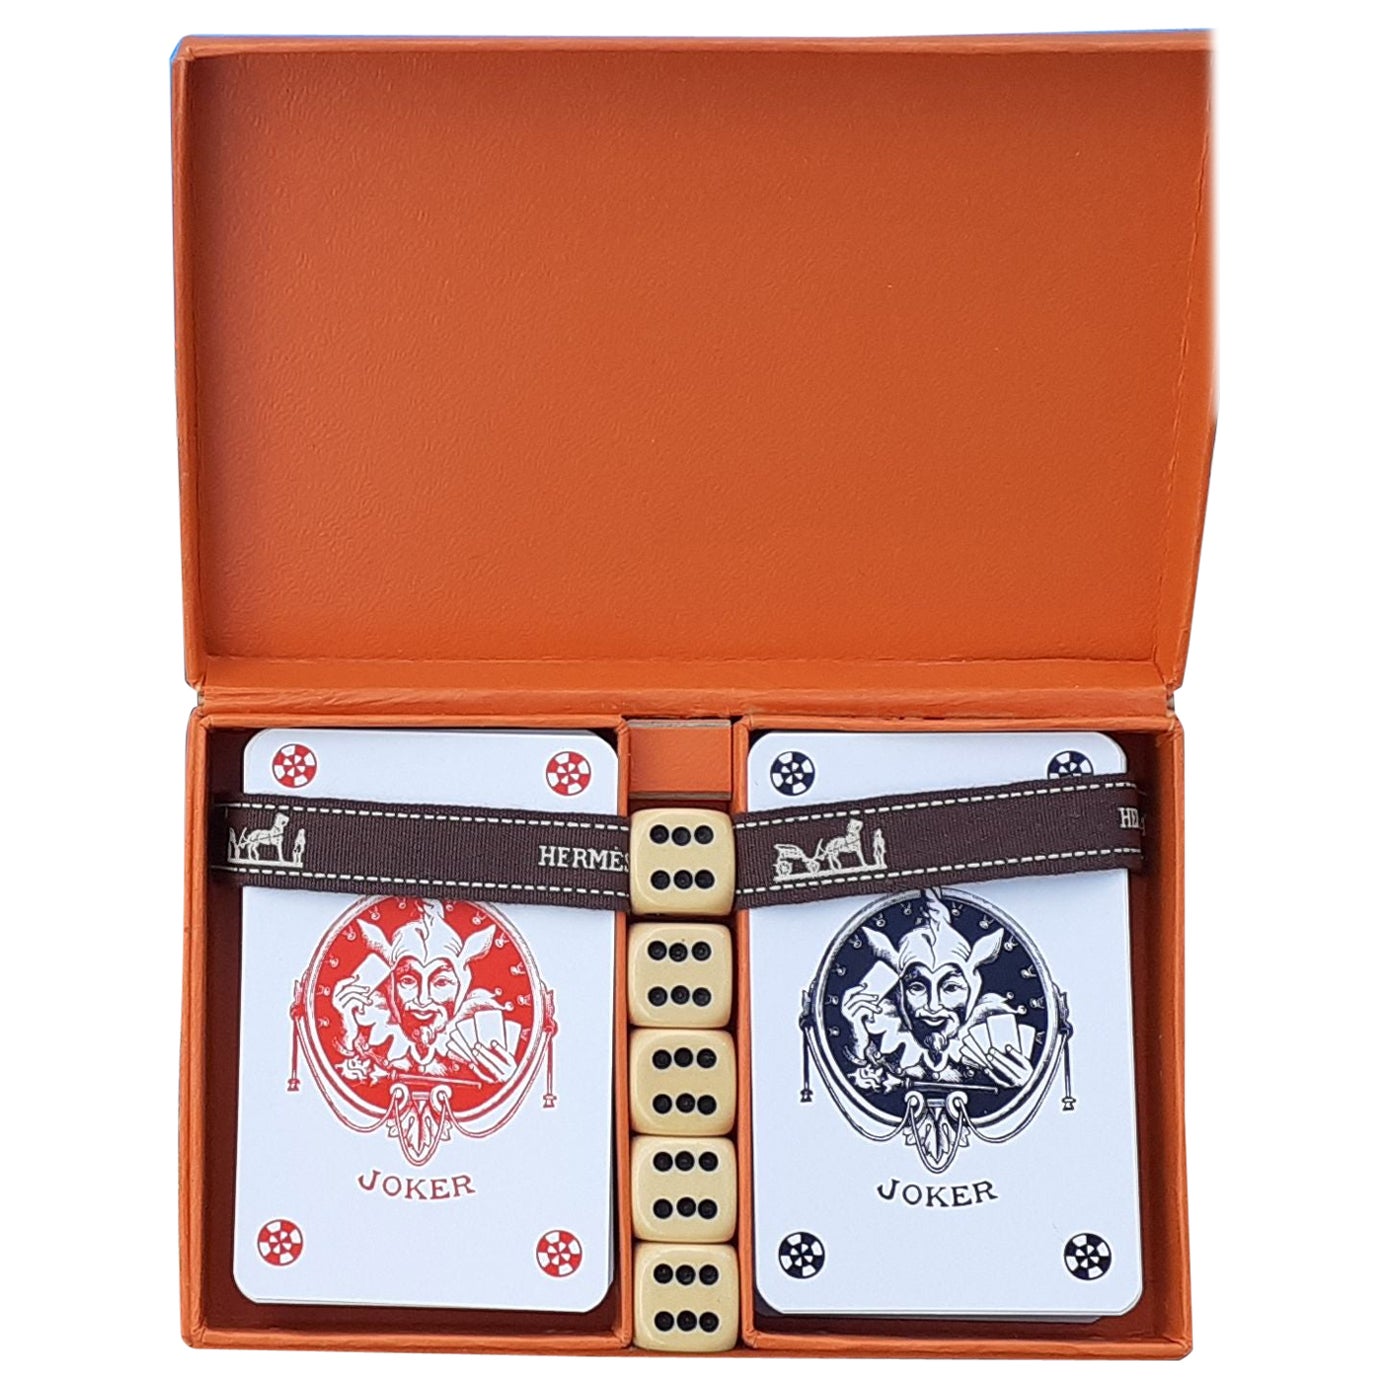 Exeptional Hermès Set of 2 Card Games from the Lydia Moonta Liner Casino  1974 For Sale